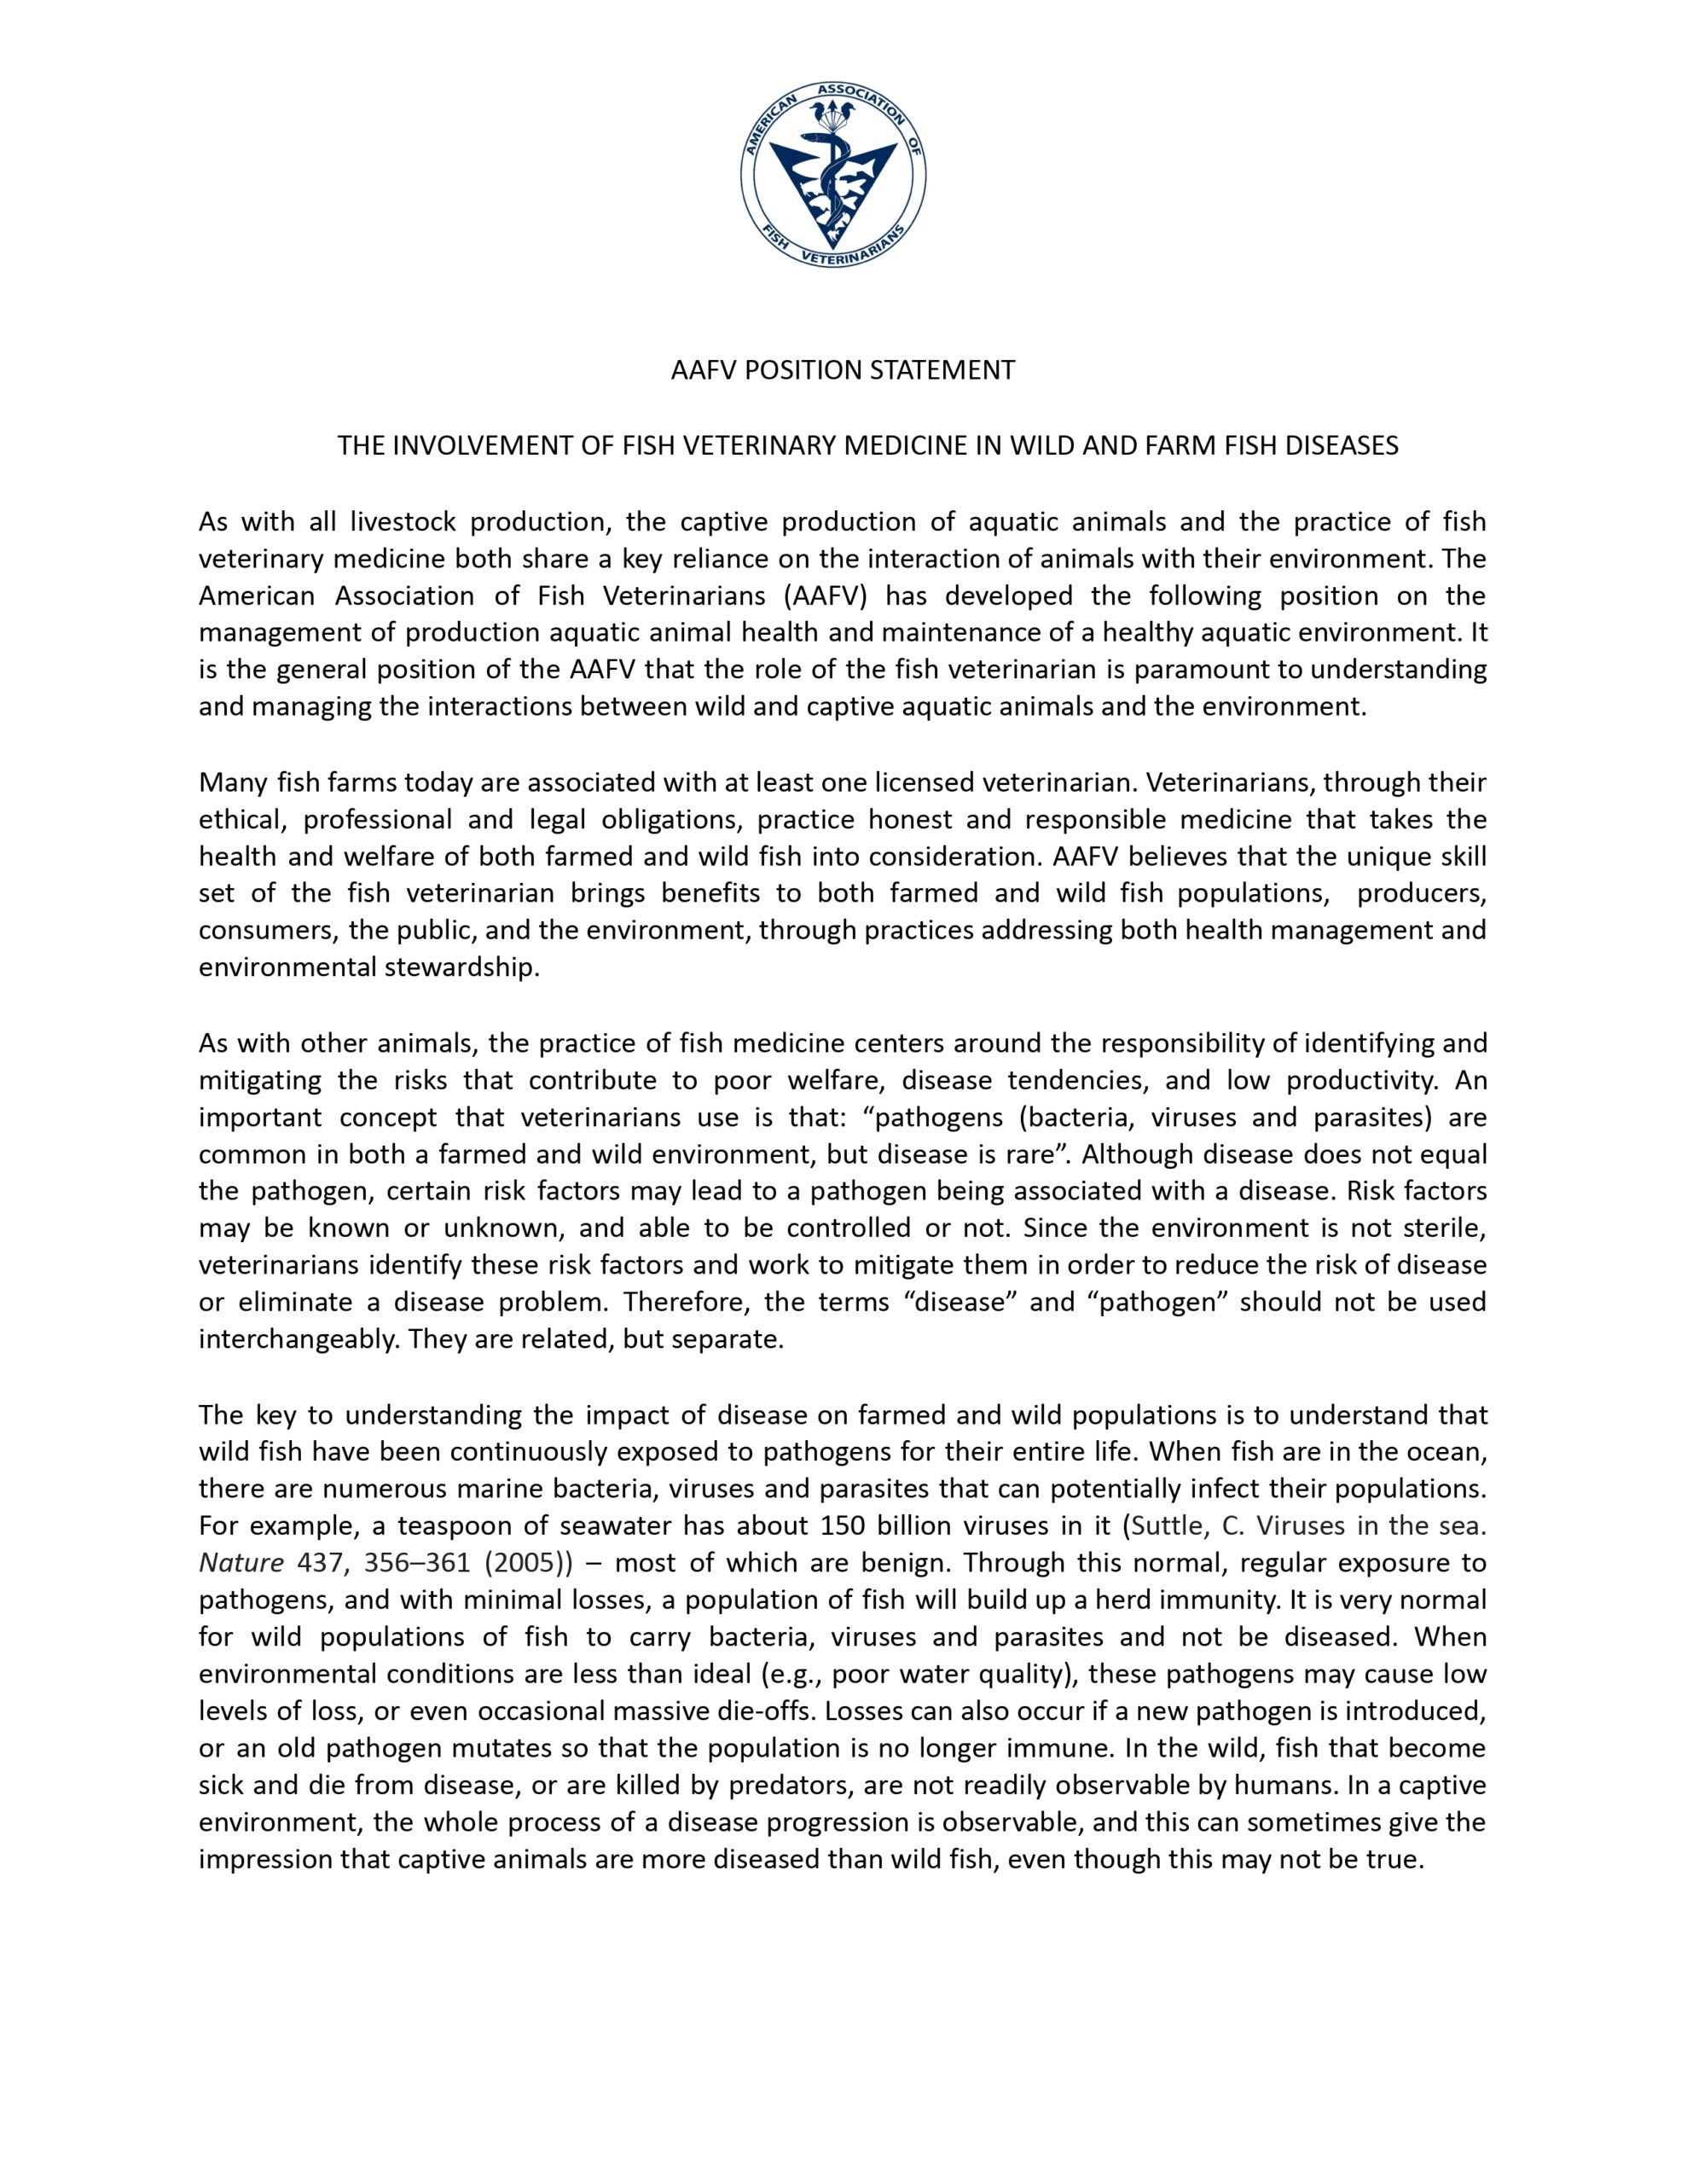 AAFV Statement on The Involvement of Fish Veterinary Medicine in Wild and Farm Fish Diseases_page-0001